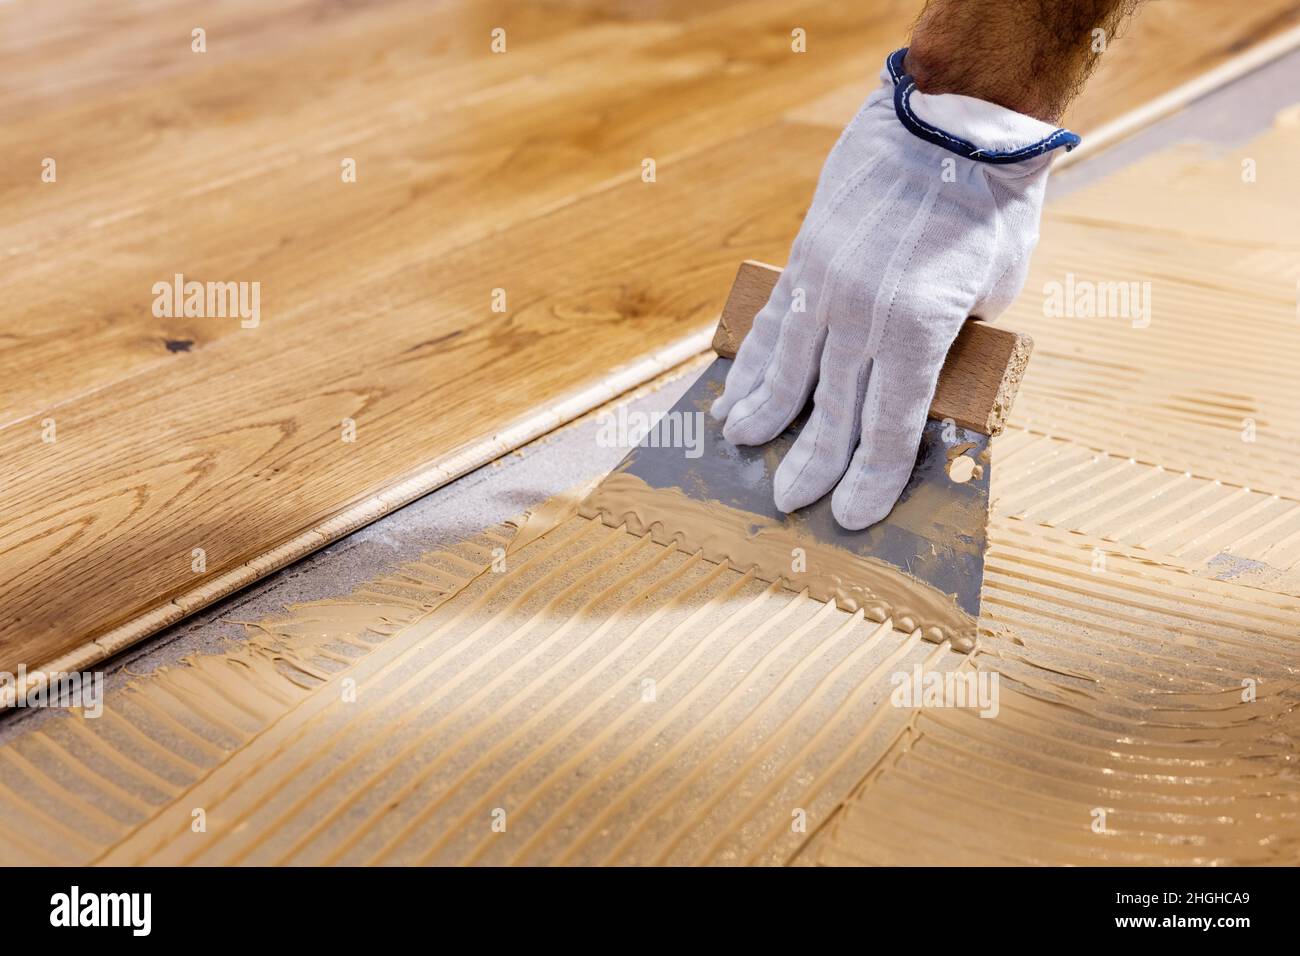 worker apply adhesive for 3 layer parquet flooring Stock Photo